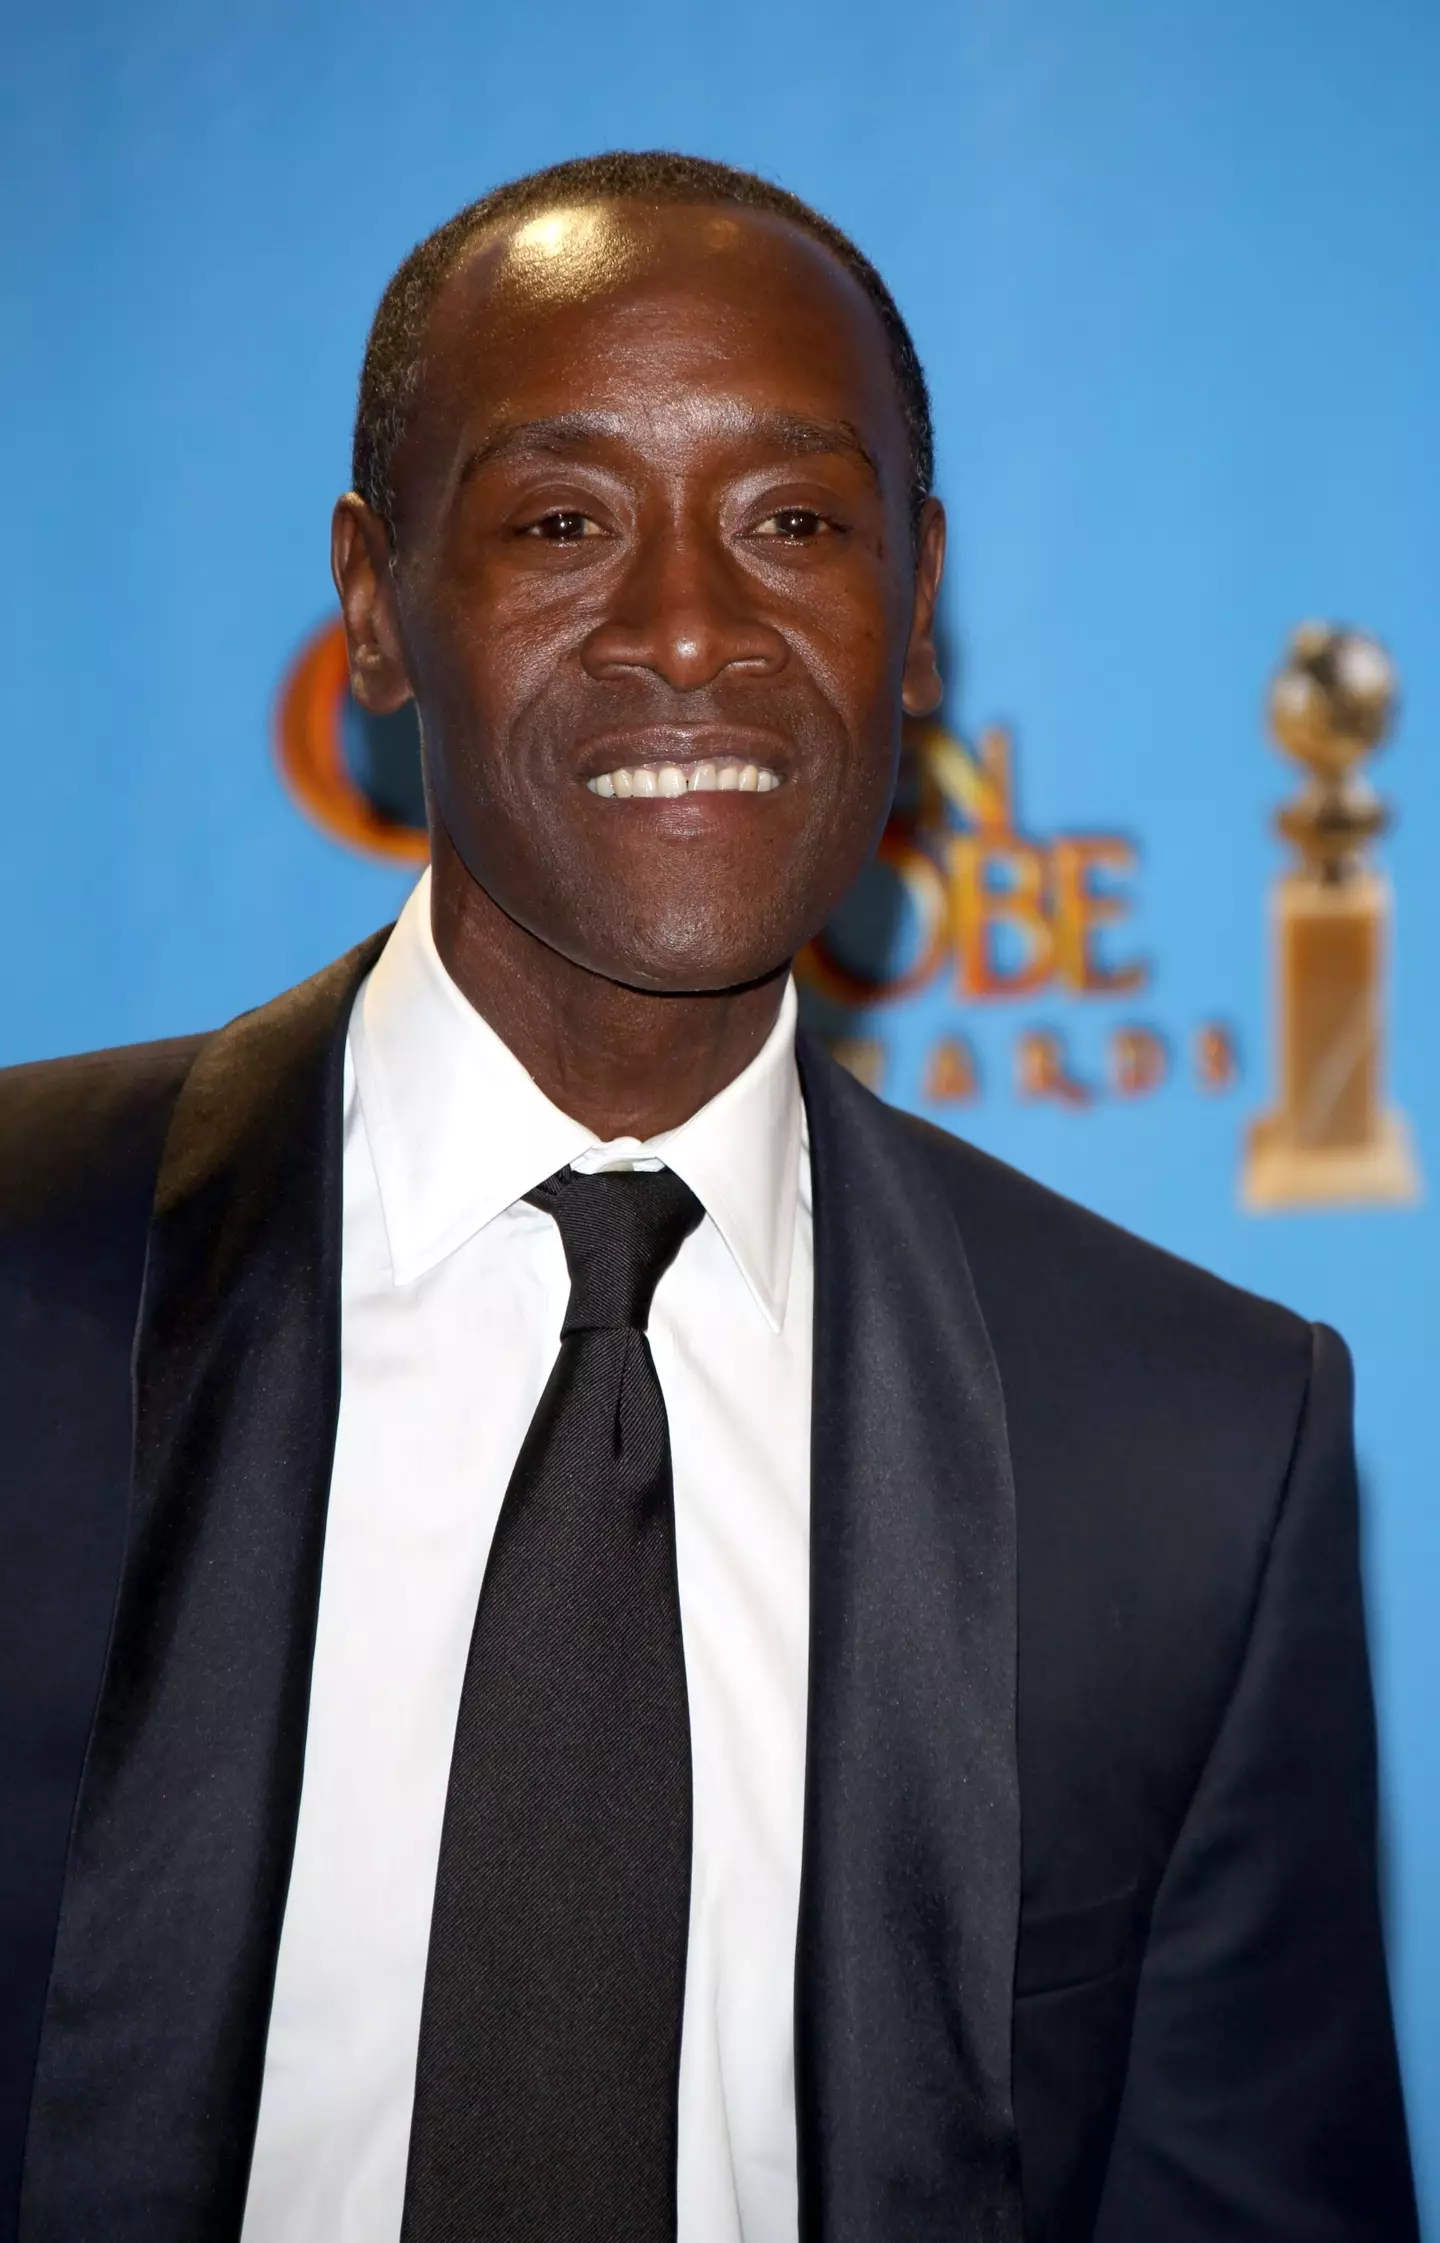 Don Cheadle confirmed his Marvel contract will wrap up with Armor Wars.